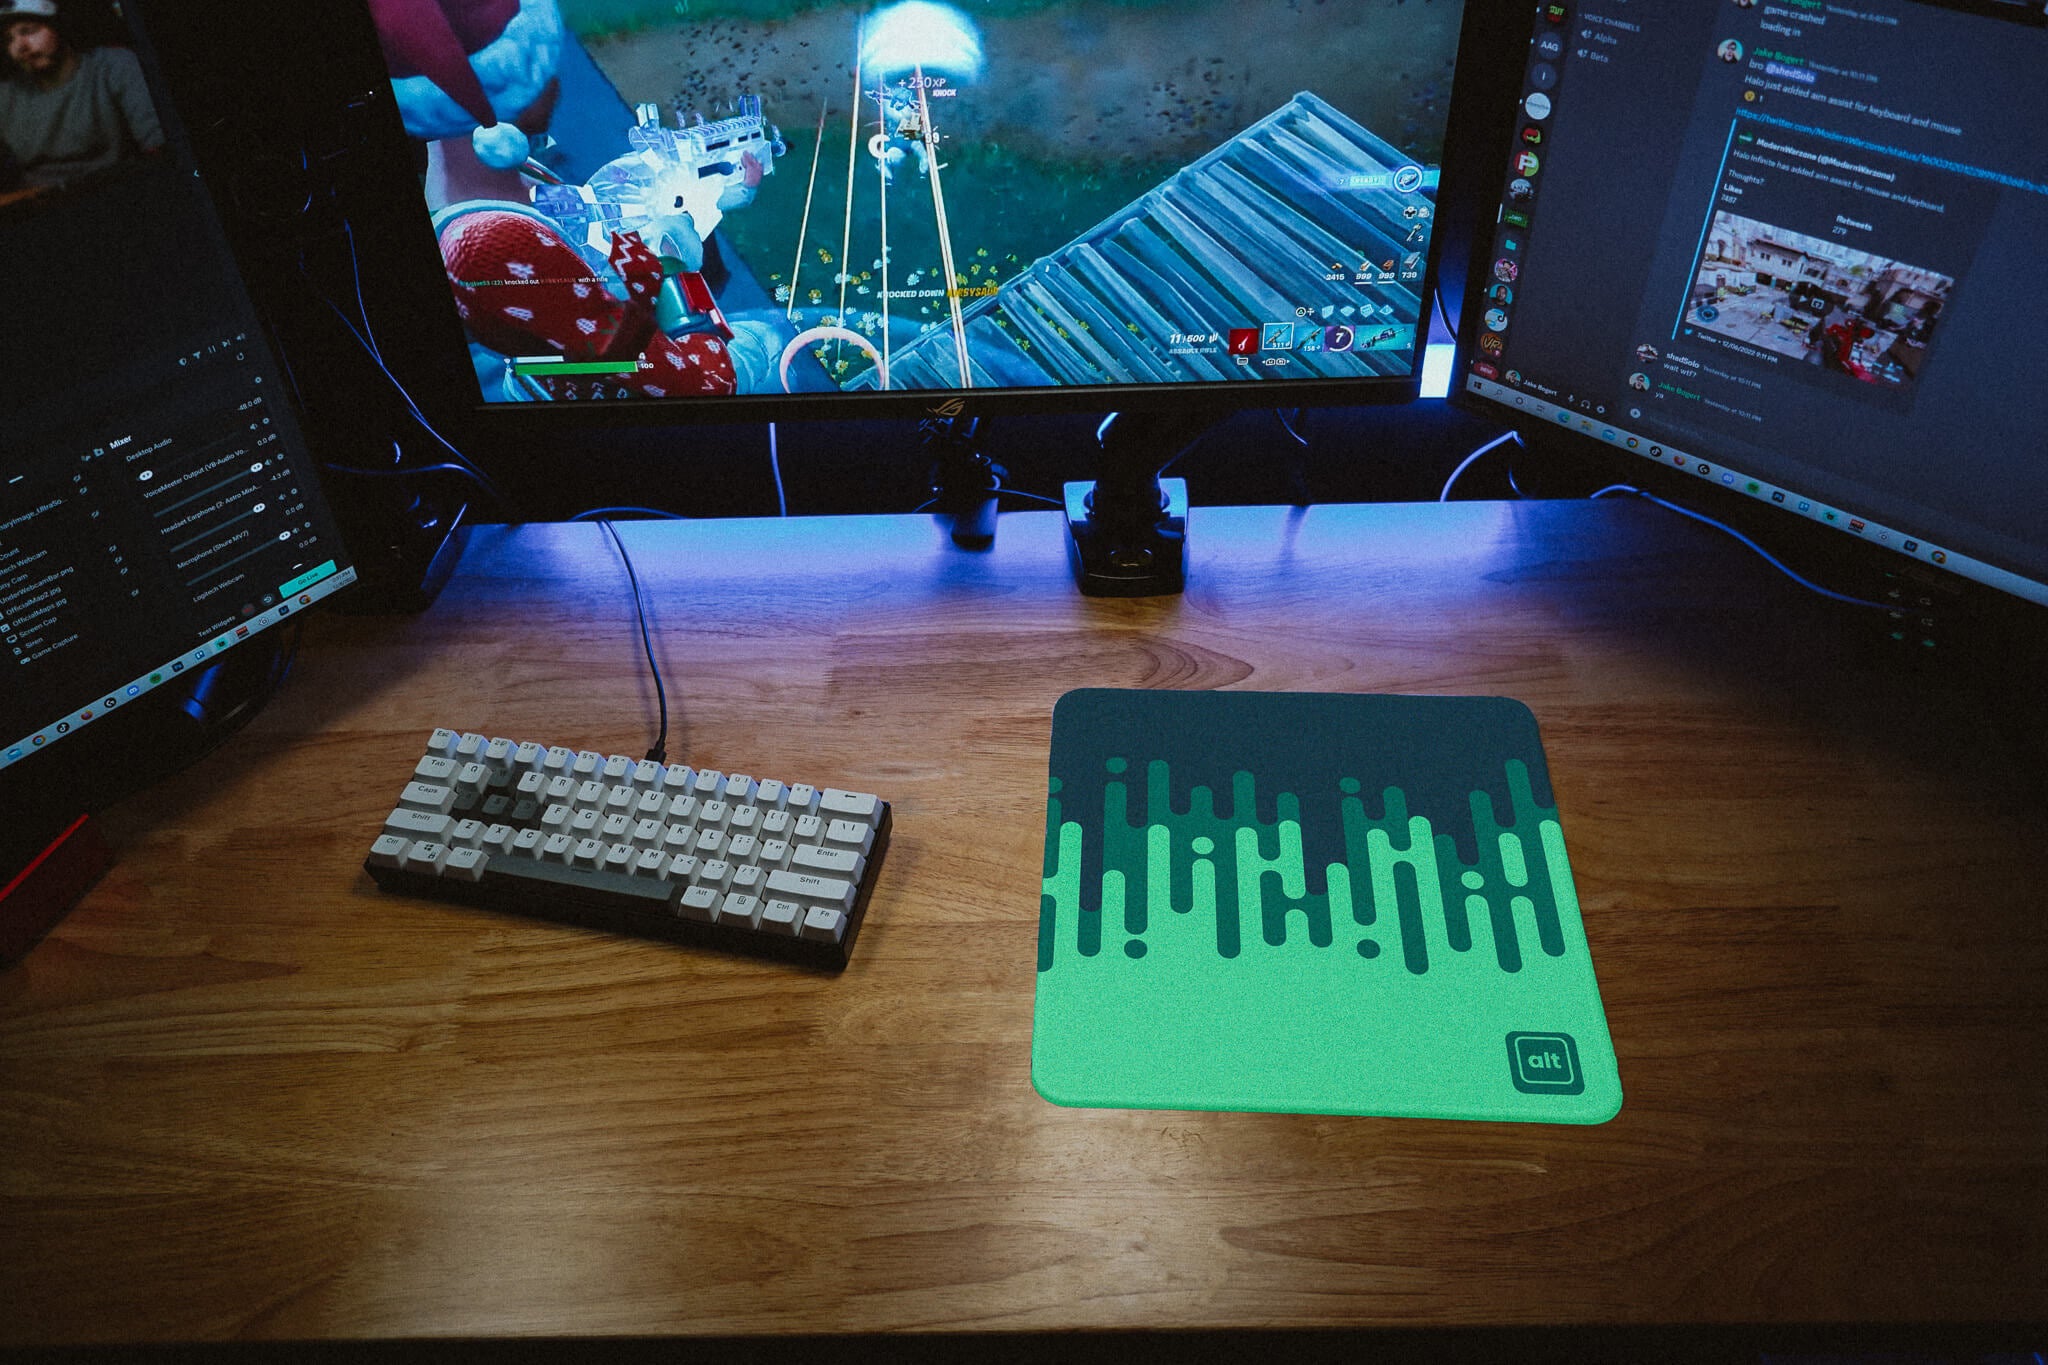 Linear Waves Forest Mousepad